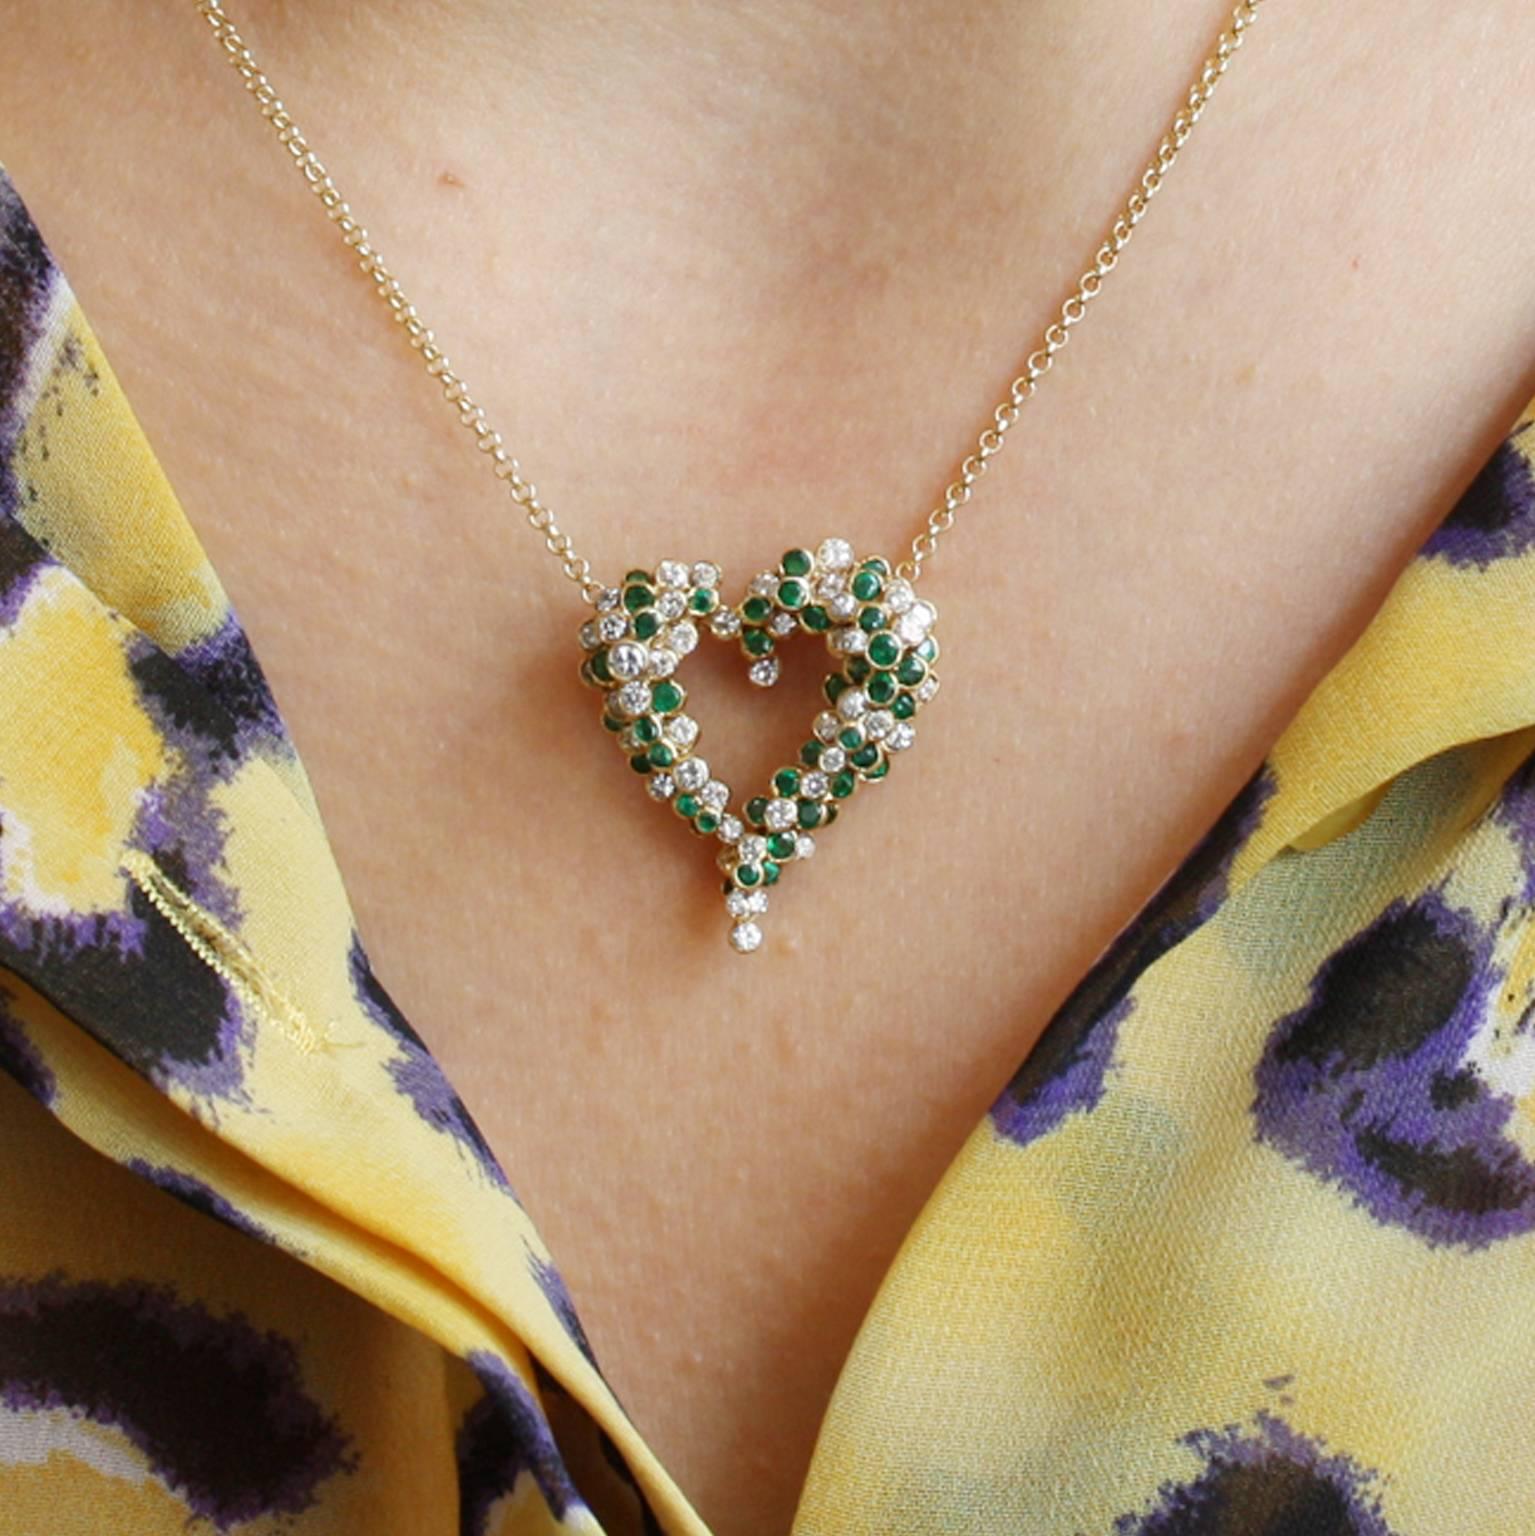 Women's or Men's Vintage Heart-Shaped Pendant with Diamonds and Emeralds